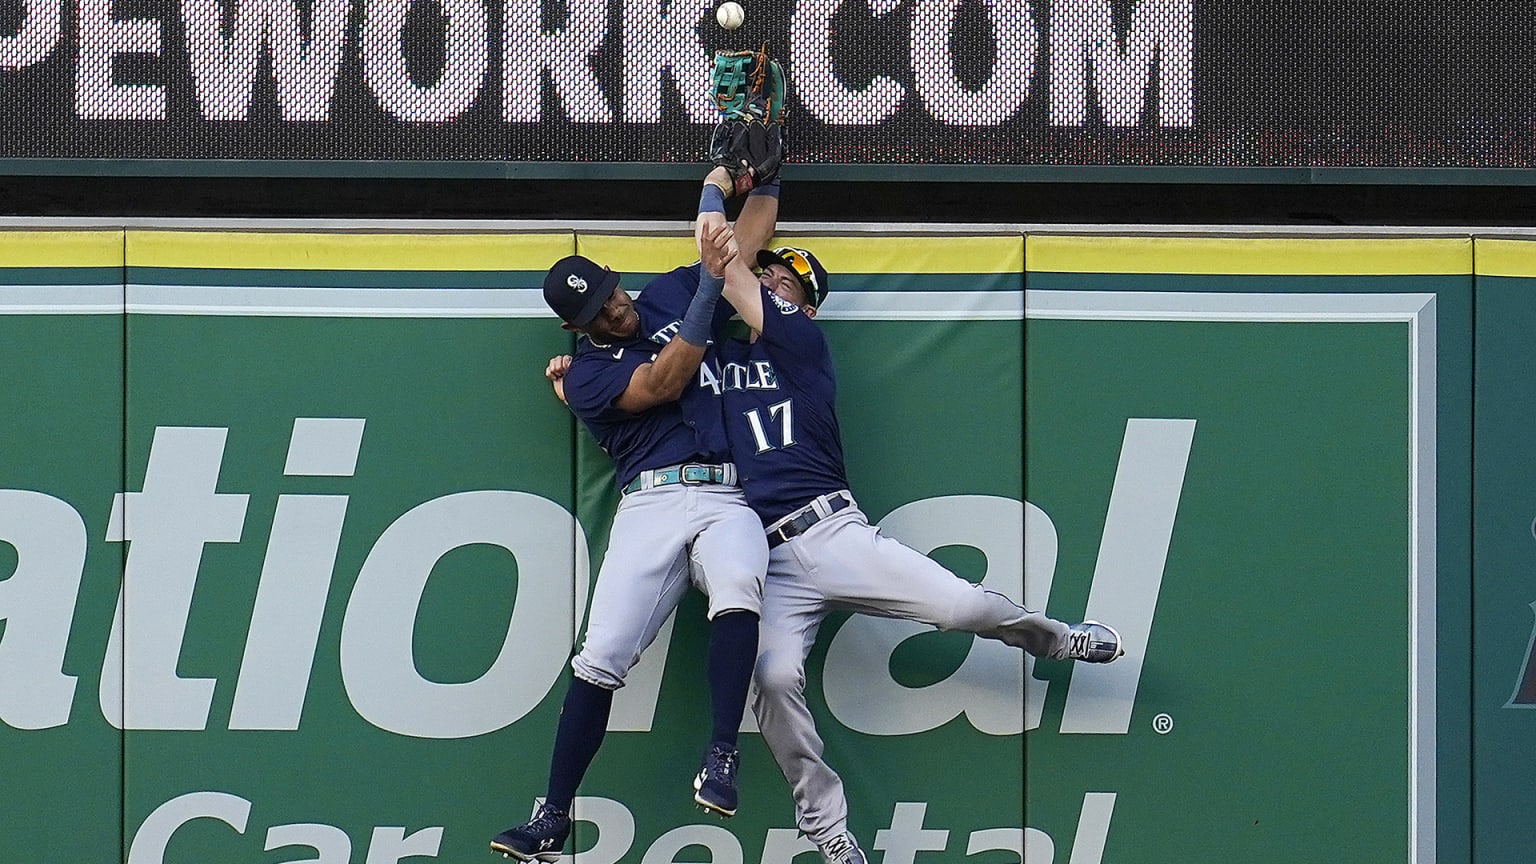 Two Mariners outfielders collide as they leap against the wall, the ball hovering just above their gloves